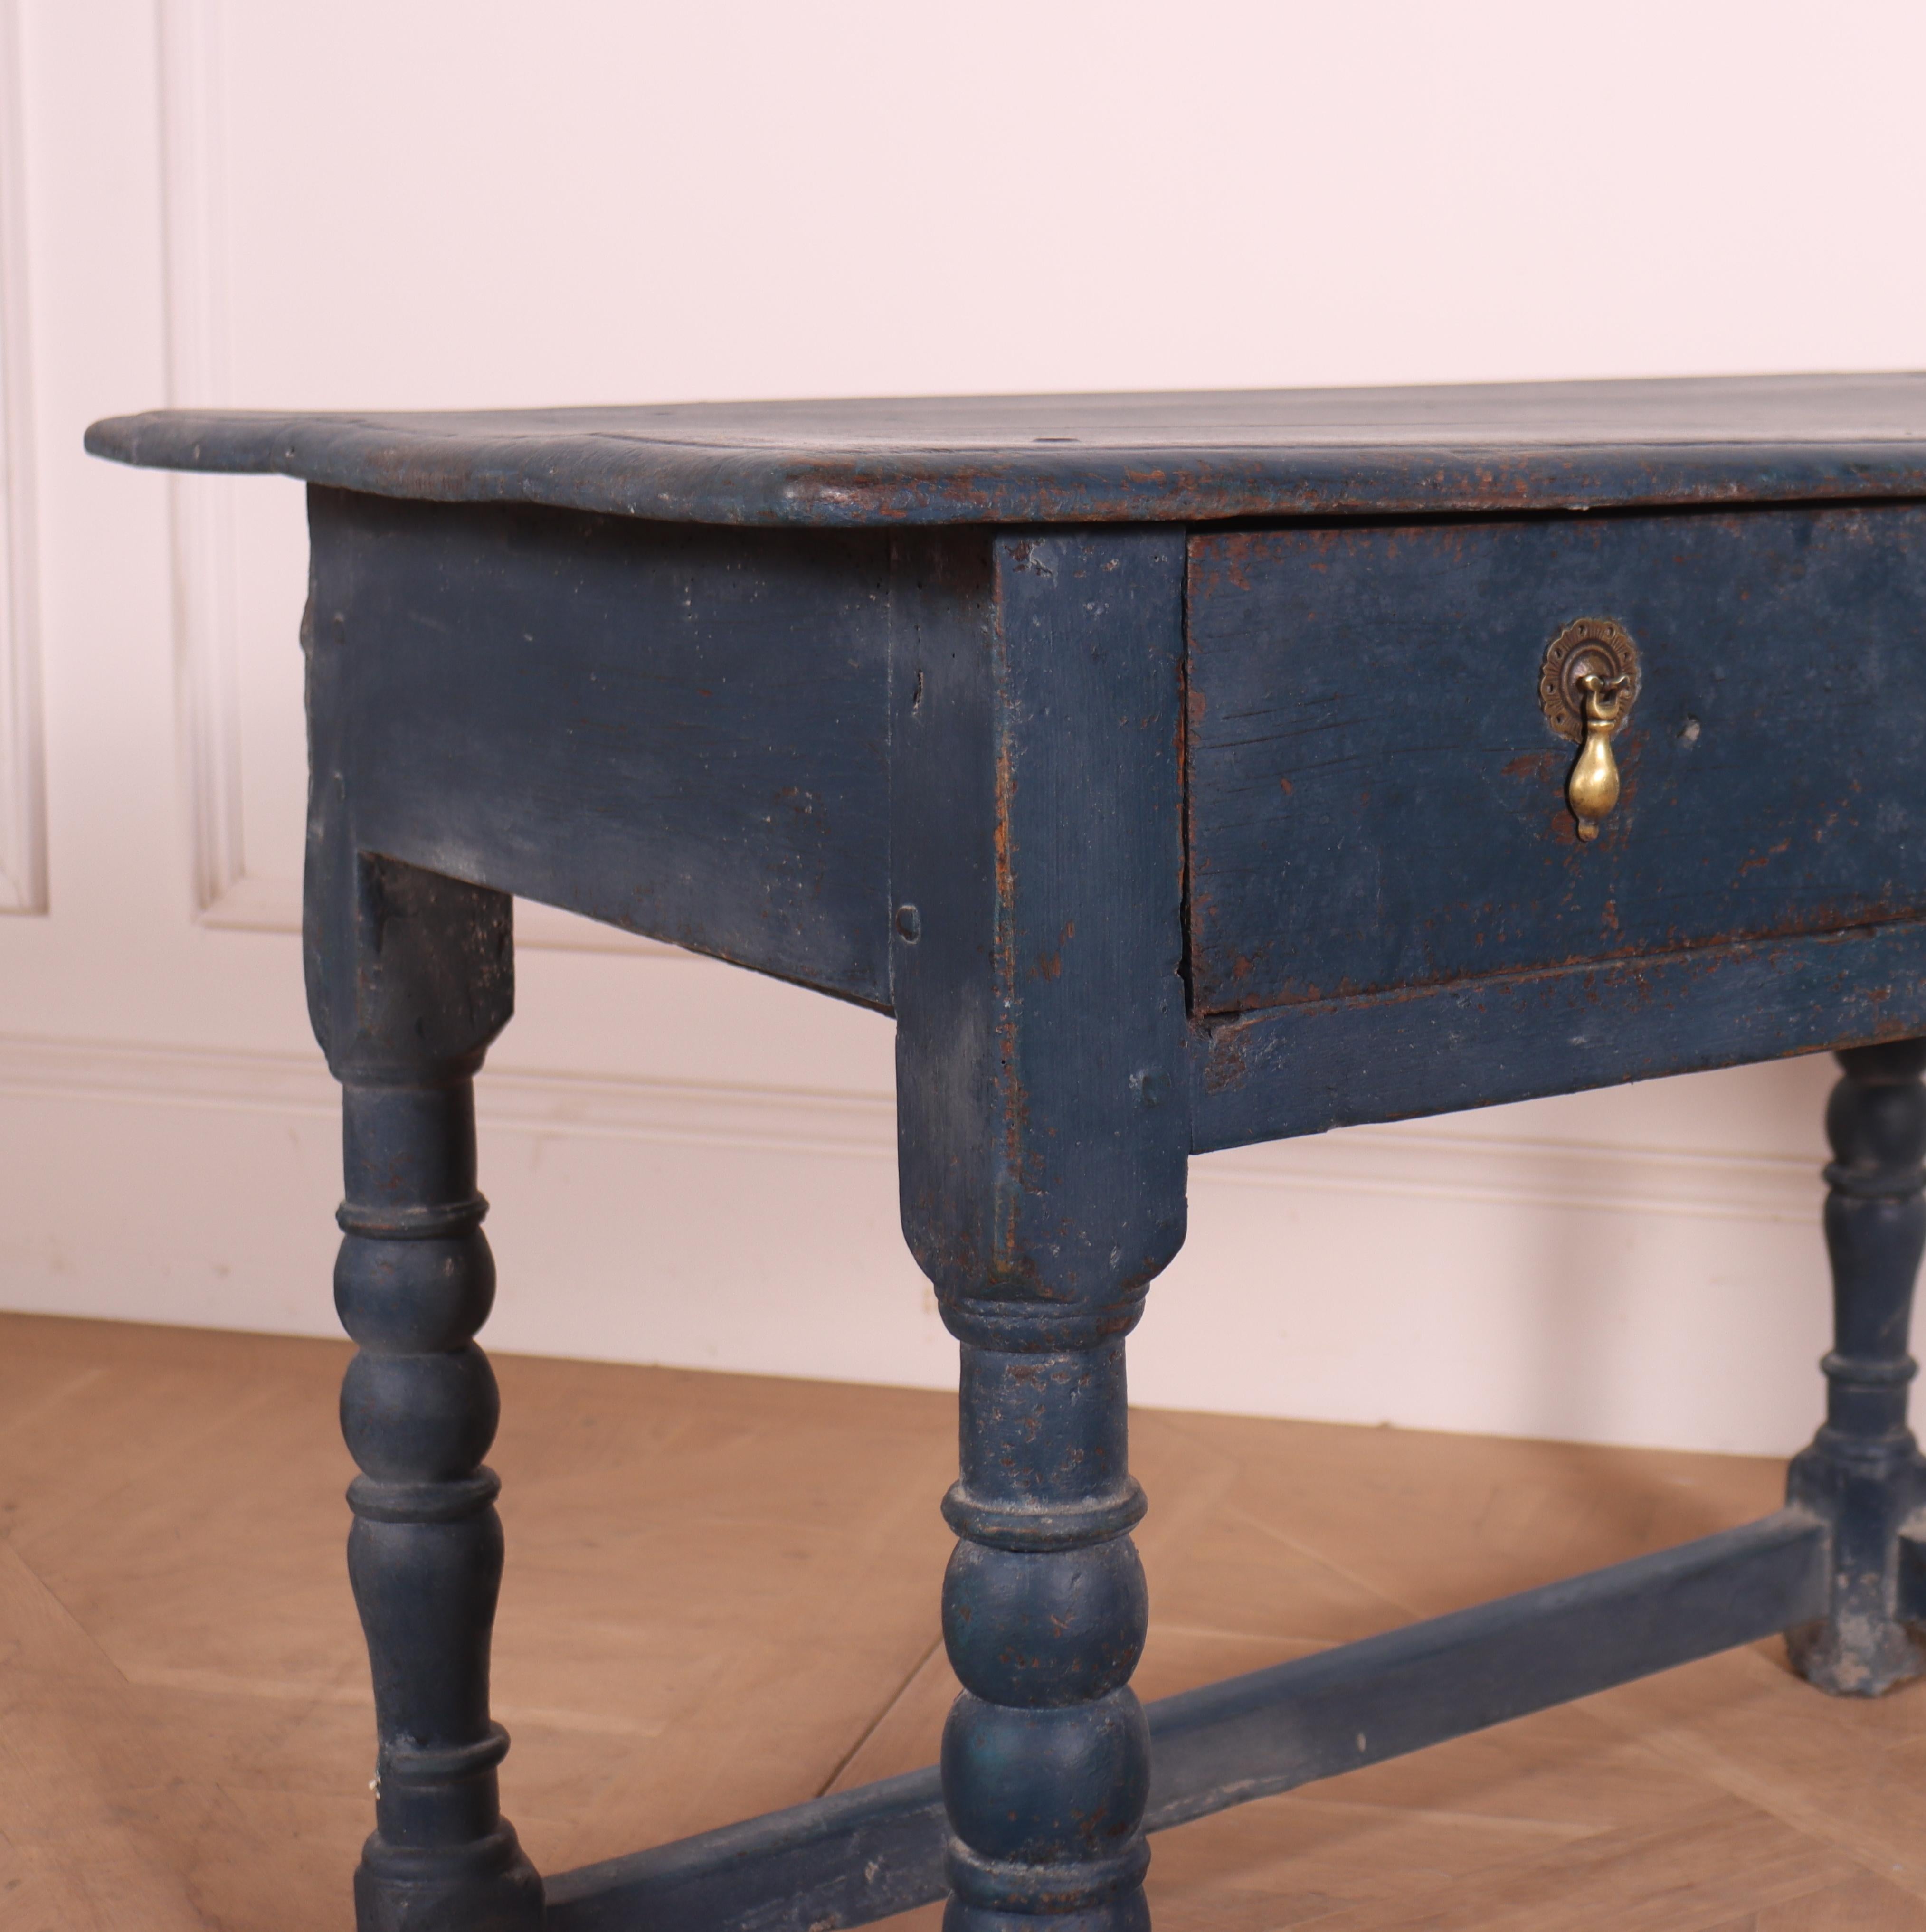 18th century English painted oak one drawer lamp table. 1780.

Dimensions
35.5 inches (90 cms) Wide
20 inches (51 cms) Deep
24.5 inches (62 cms) High.